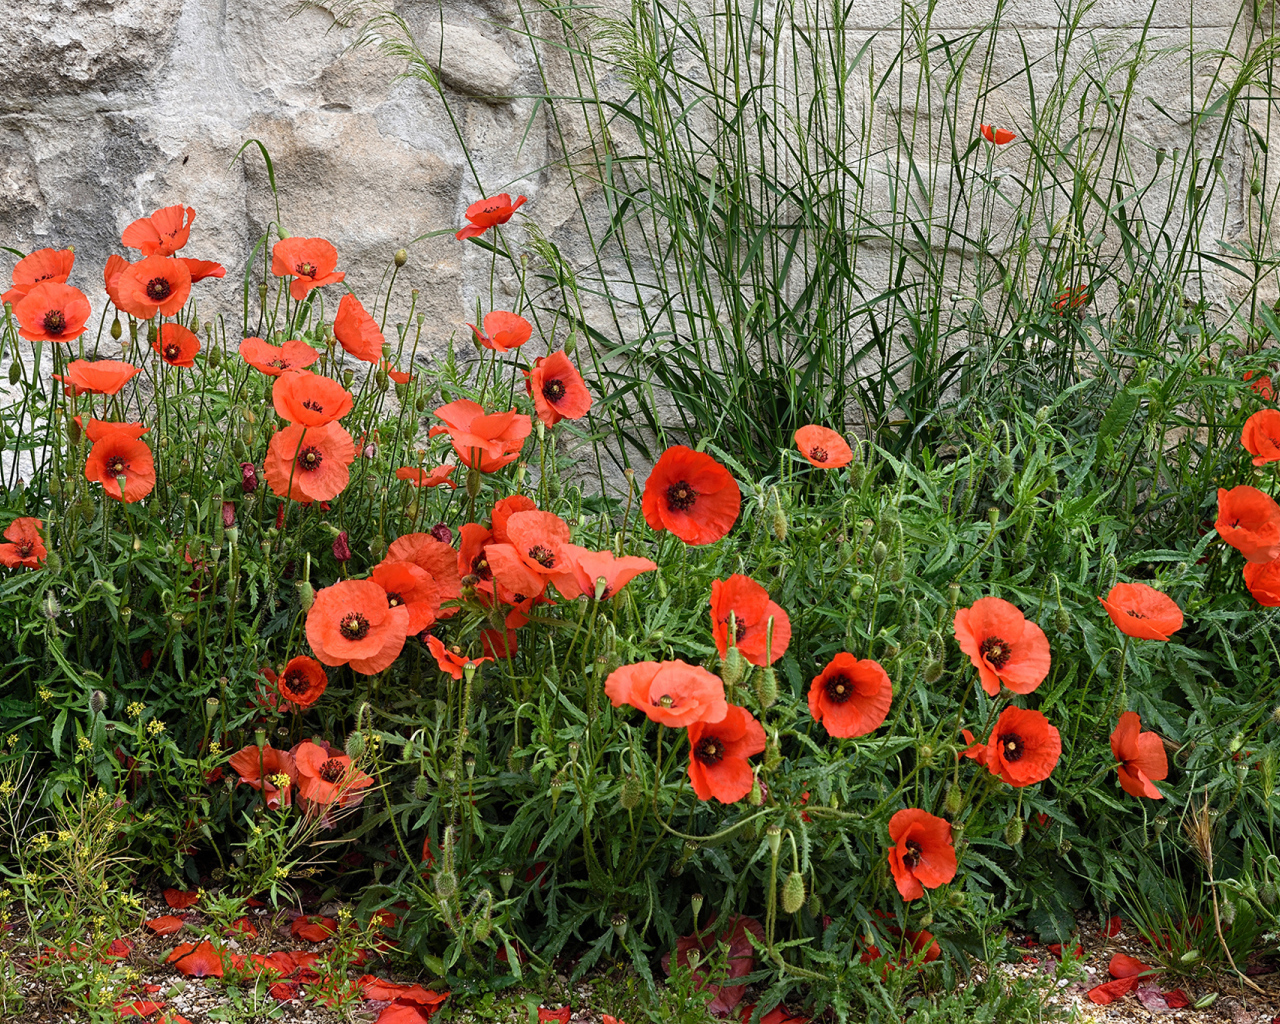 Red poppies in the green grass near the wall